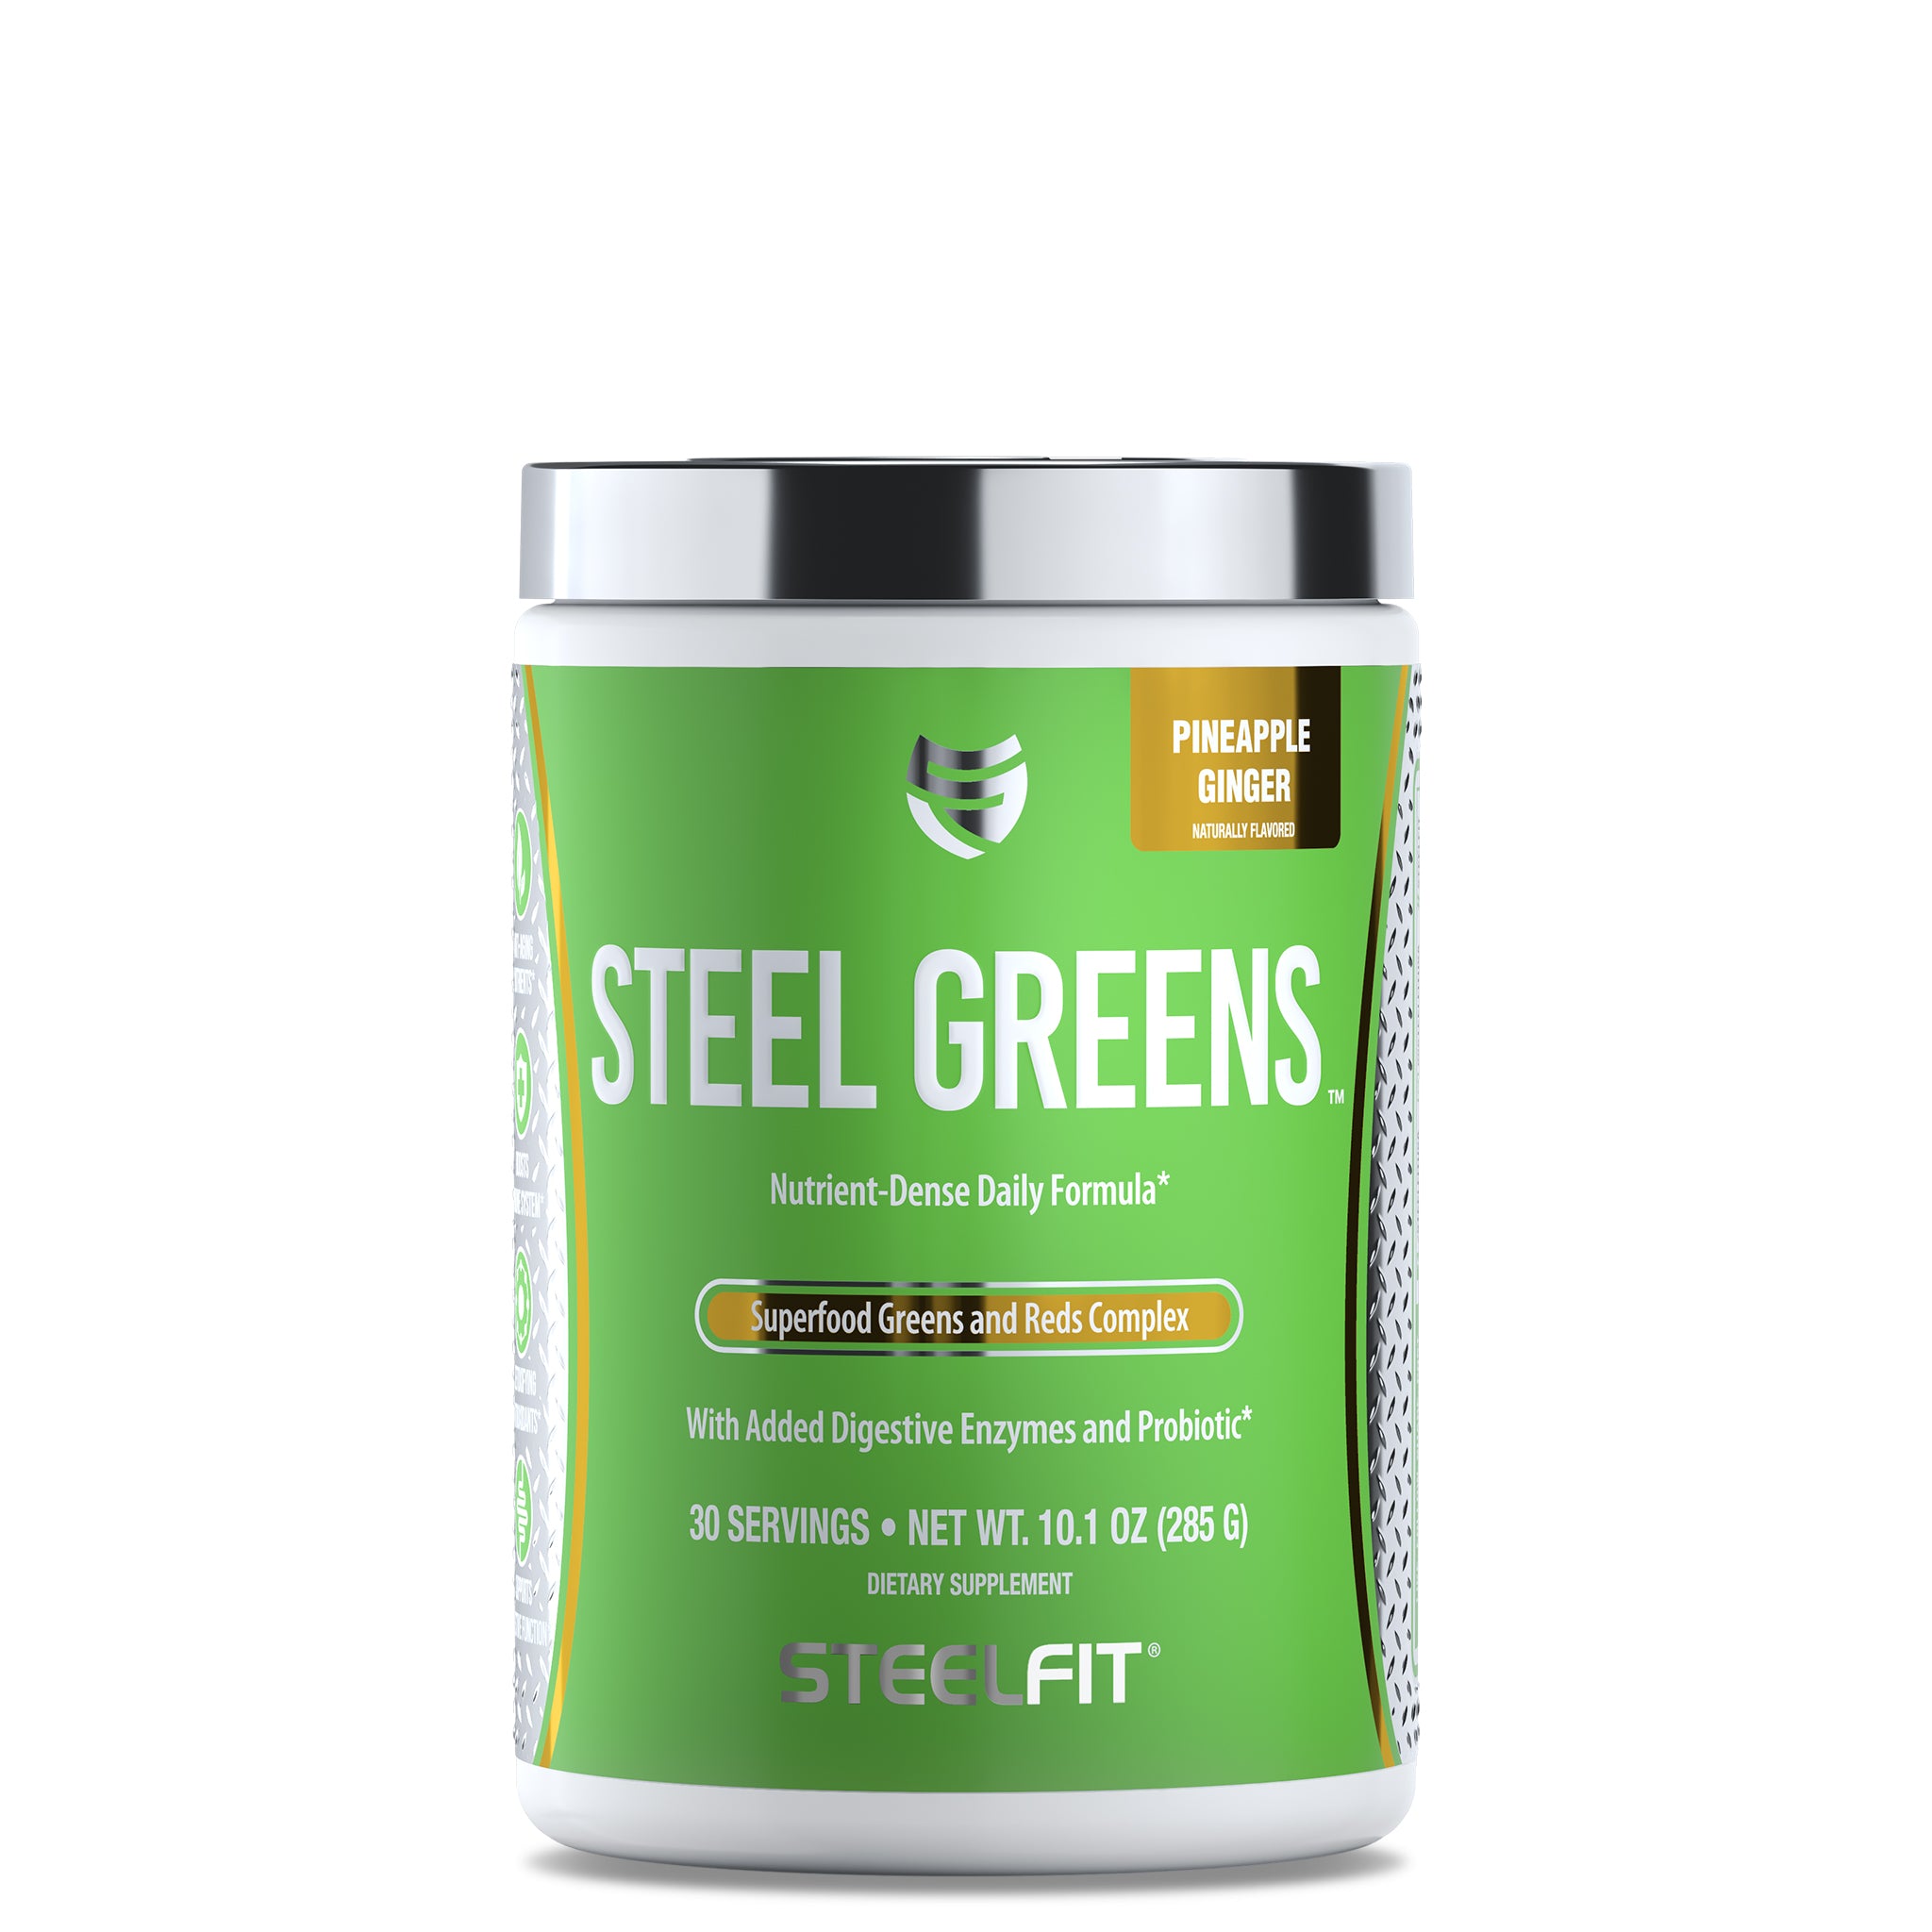 green superfood supplement, green superfood supplements, green superfood powder, pineapple ginger